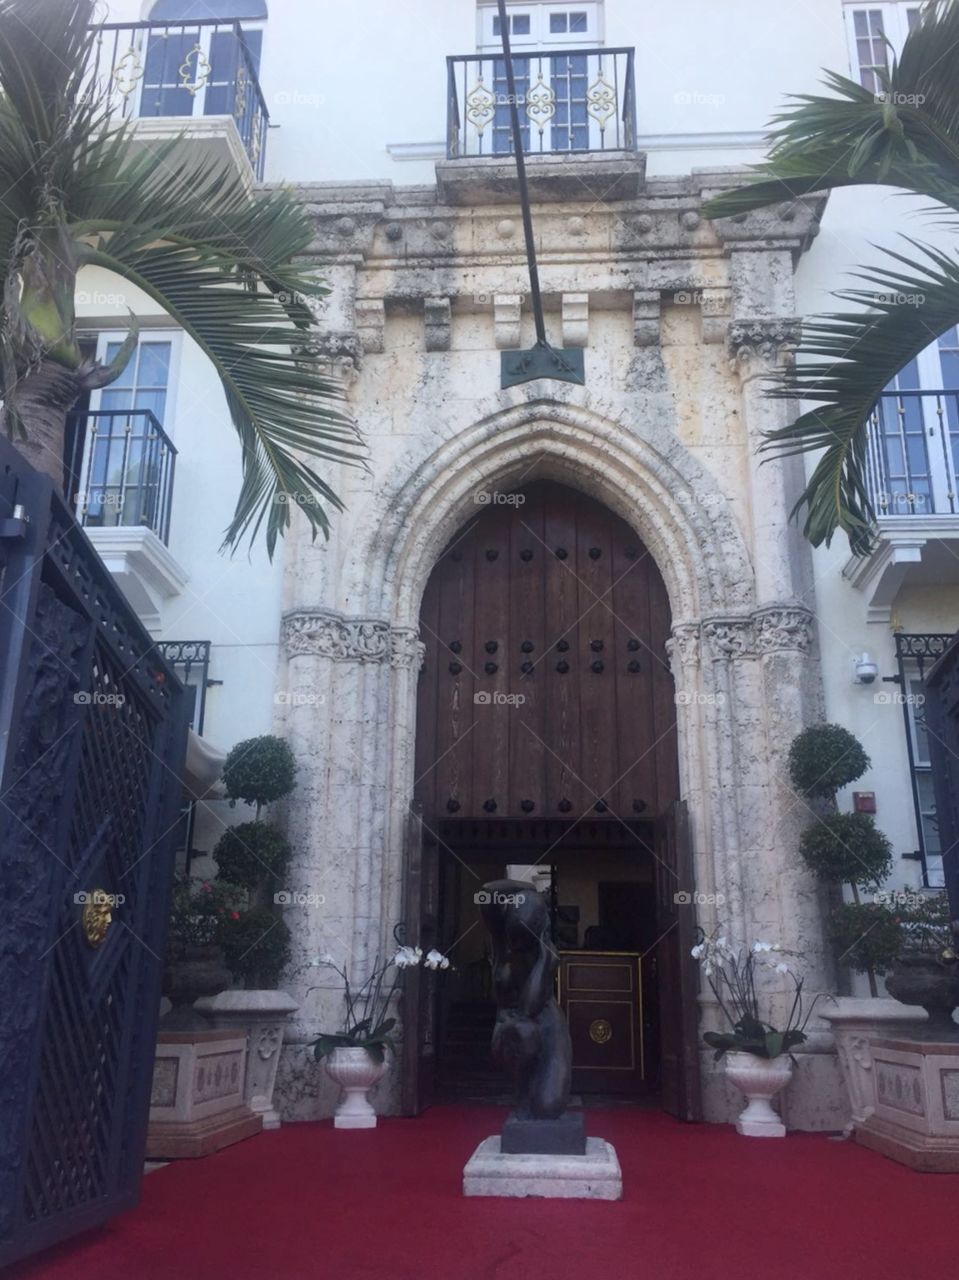 Versace’s House in Miami